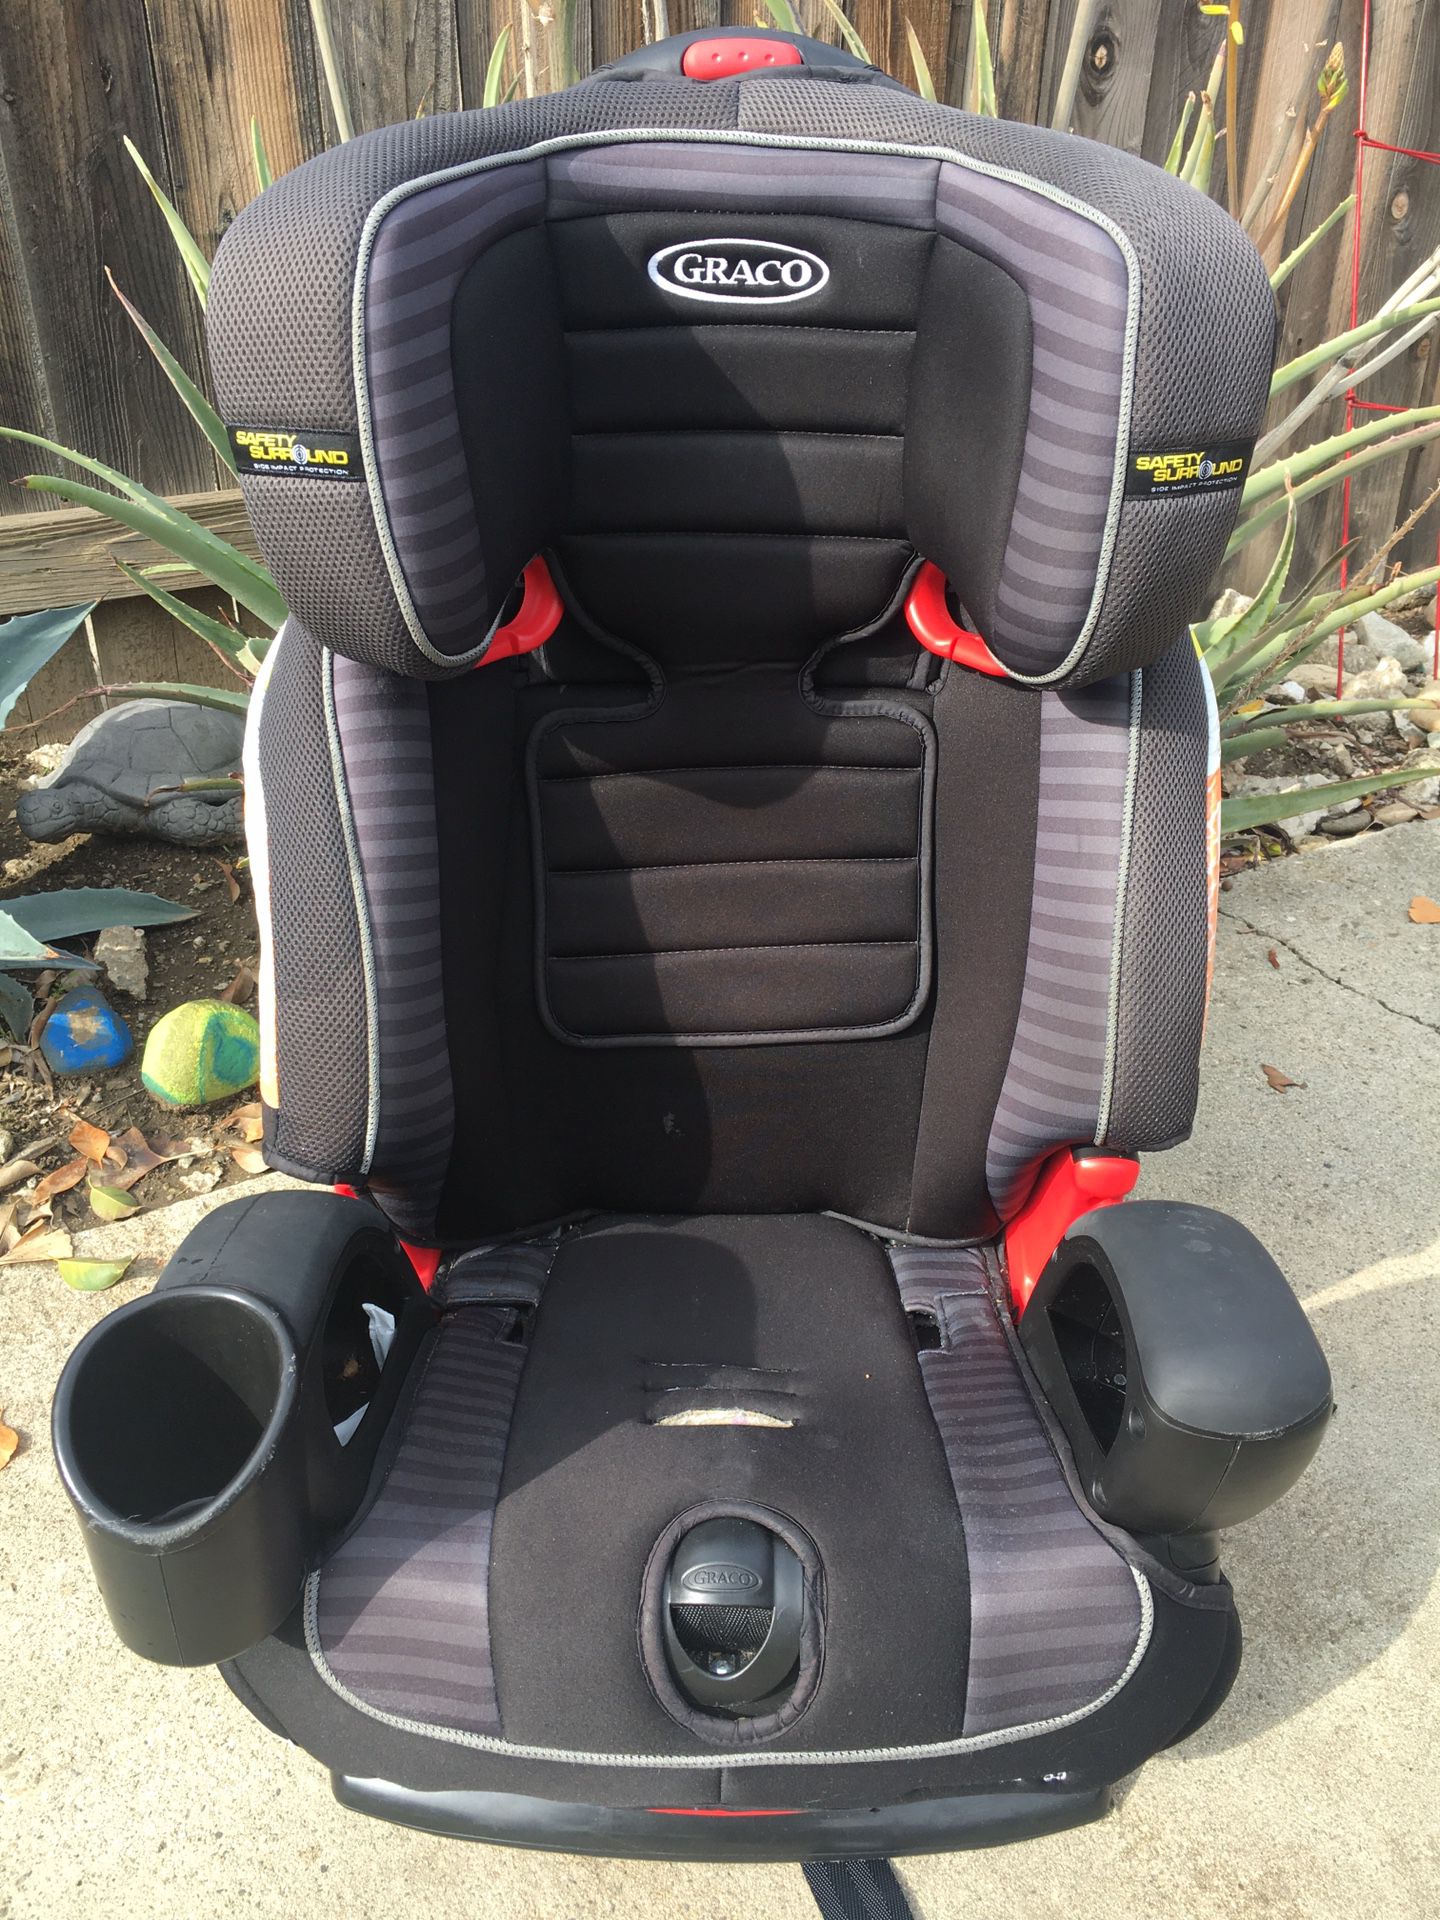 Graco 2-in1 Car Seat - Infant and Booster